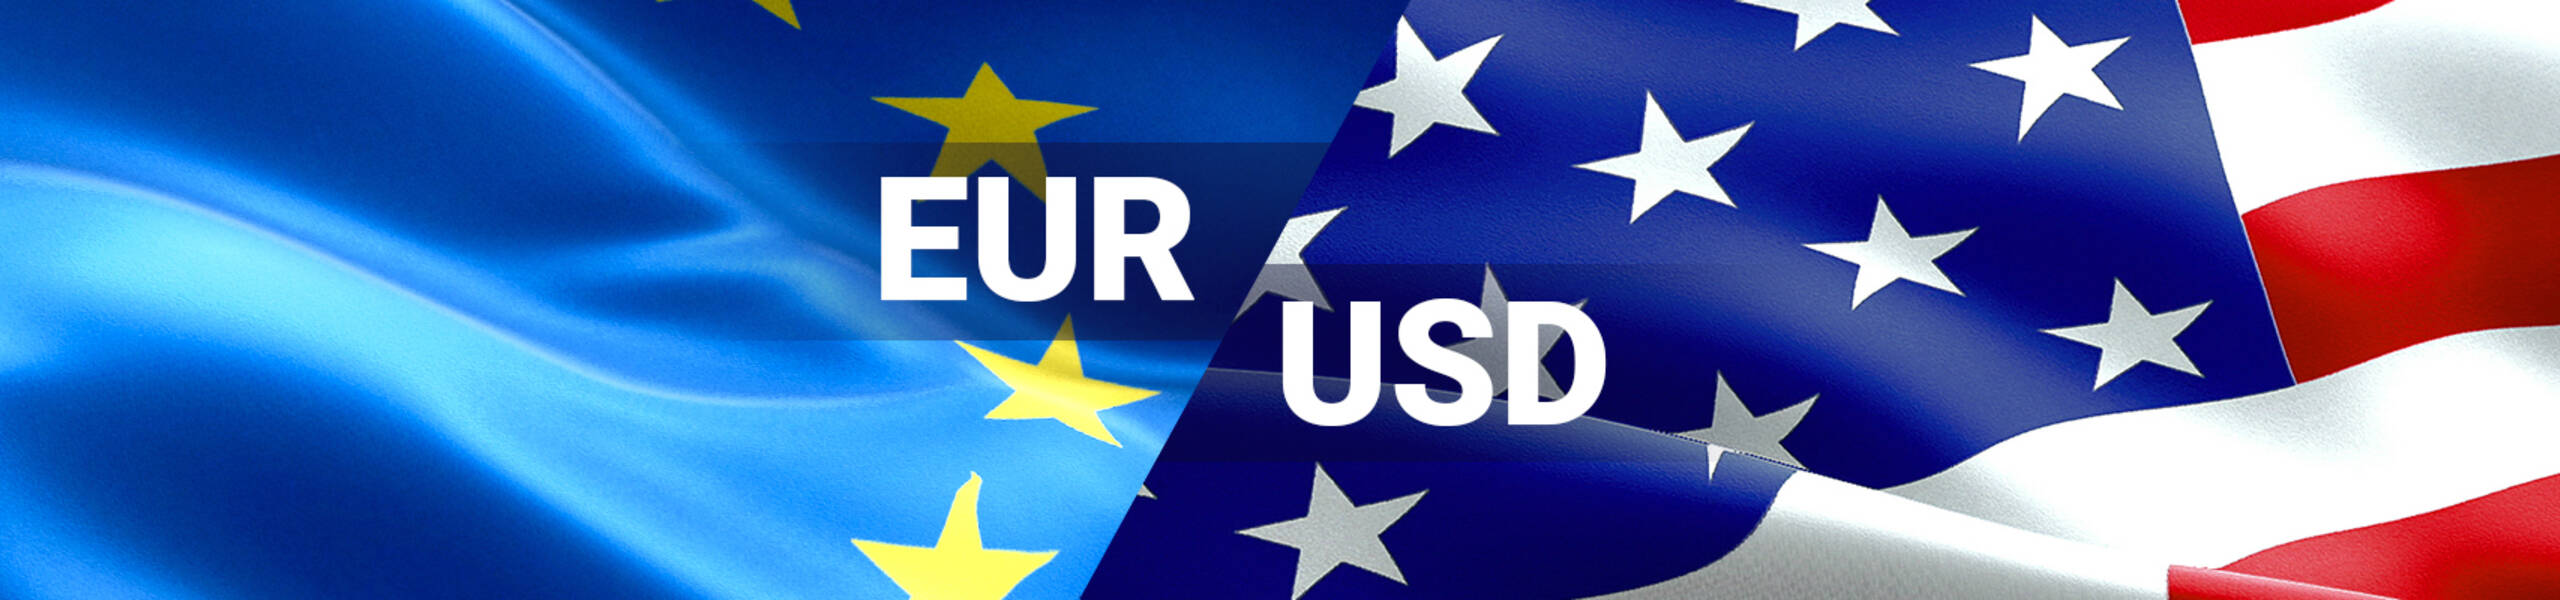 EUR/USD scopes to test levels above 1.20